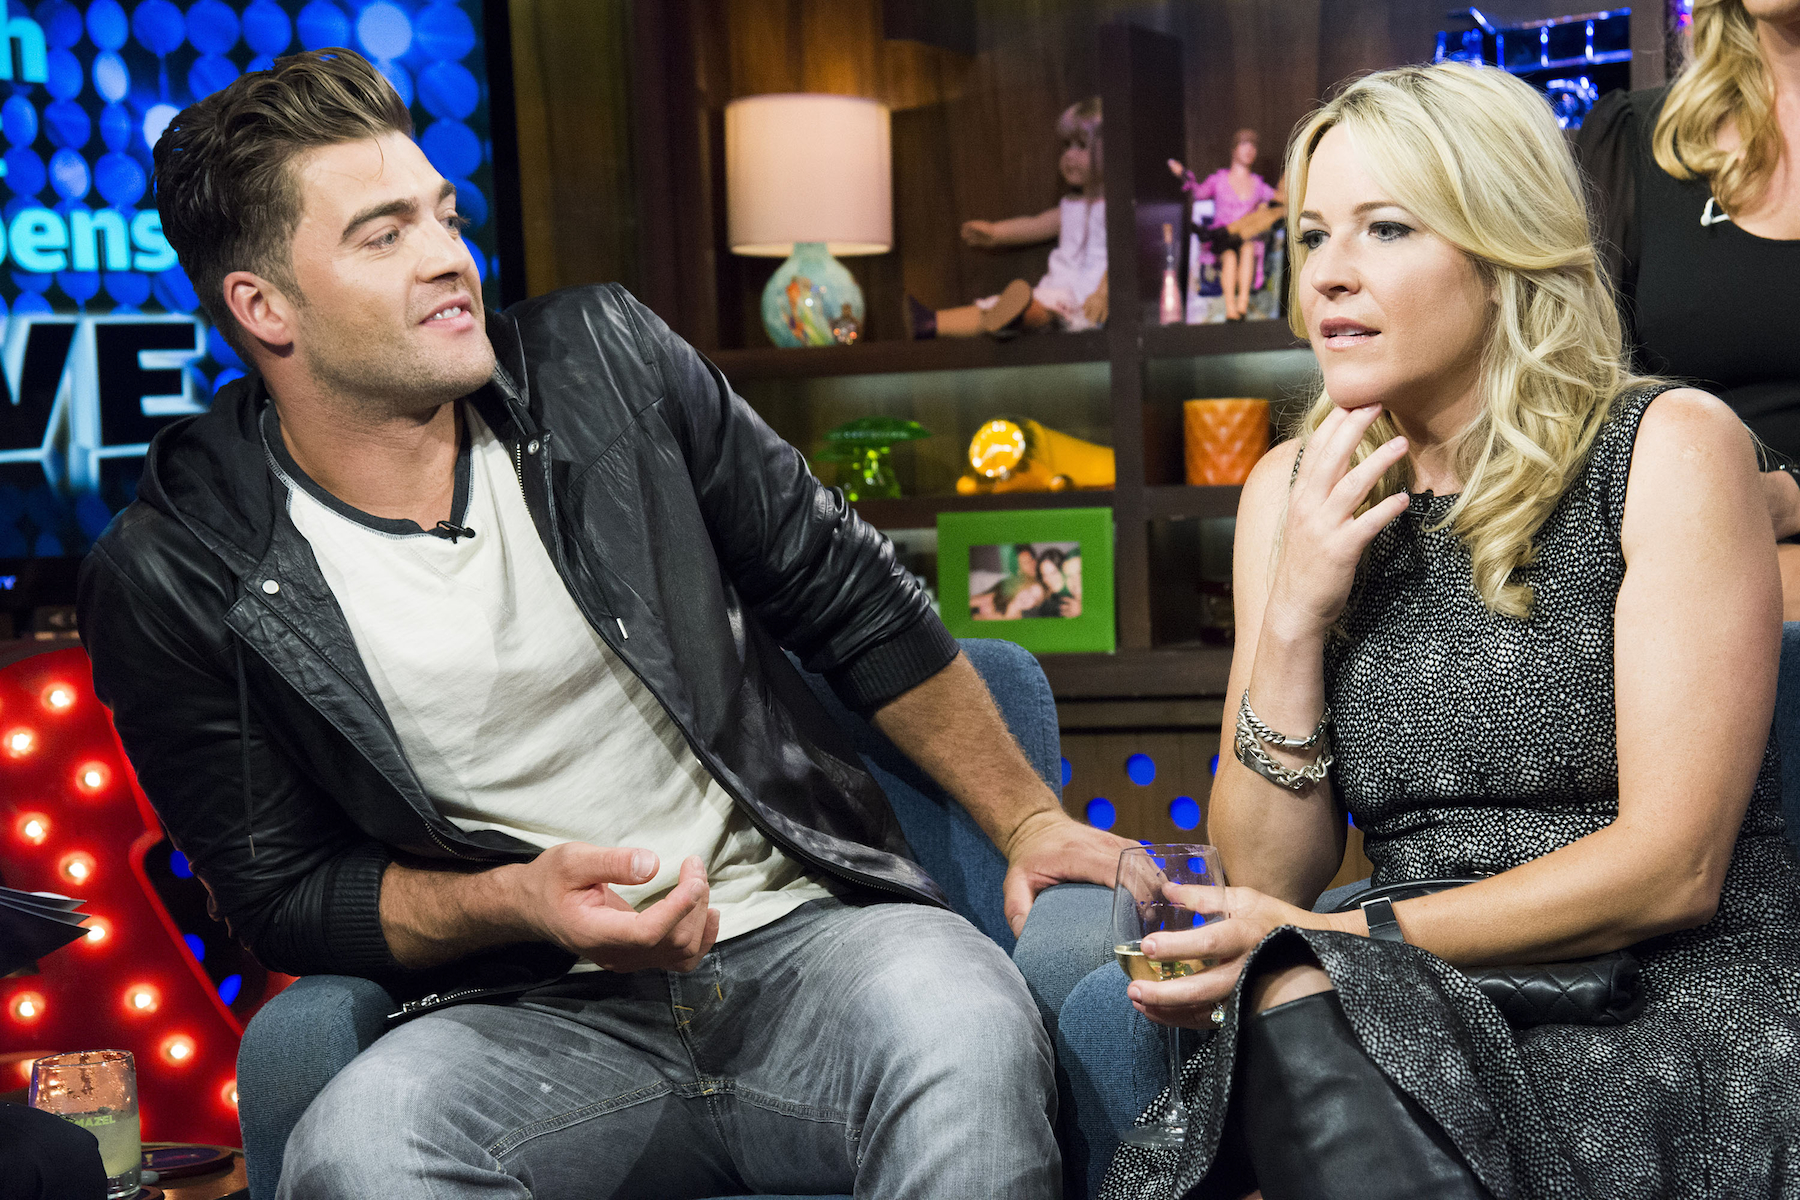 Chris 'CT' Tamburello and Beth Stolarczyk from MTV's 'The Challenge' sitting next to each other on chairs and talking while on 'Watch What Happens Live' 